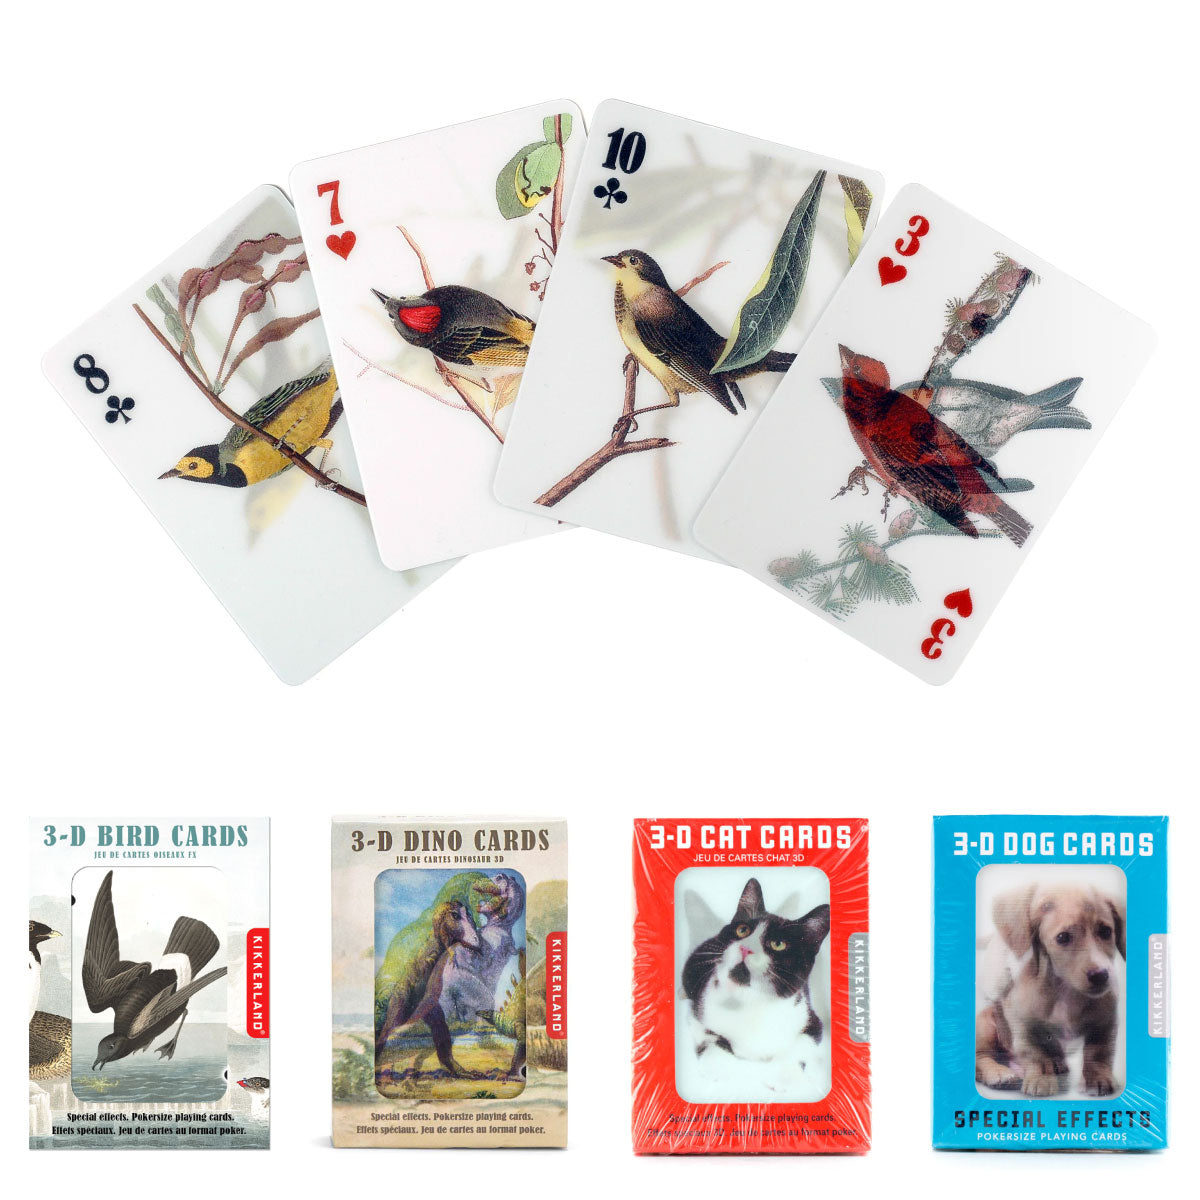 3D Lenticular Special Effects Playing Cards from Kikkerland